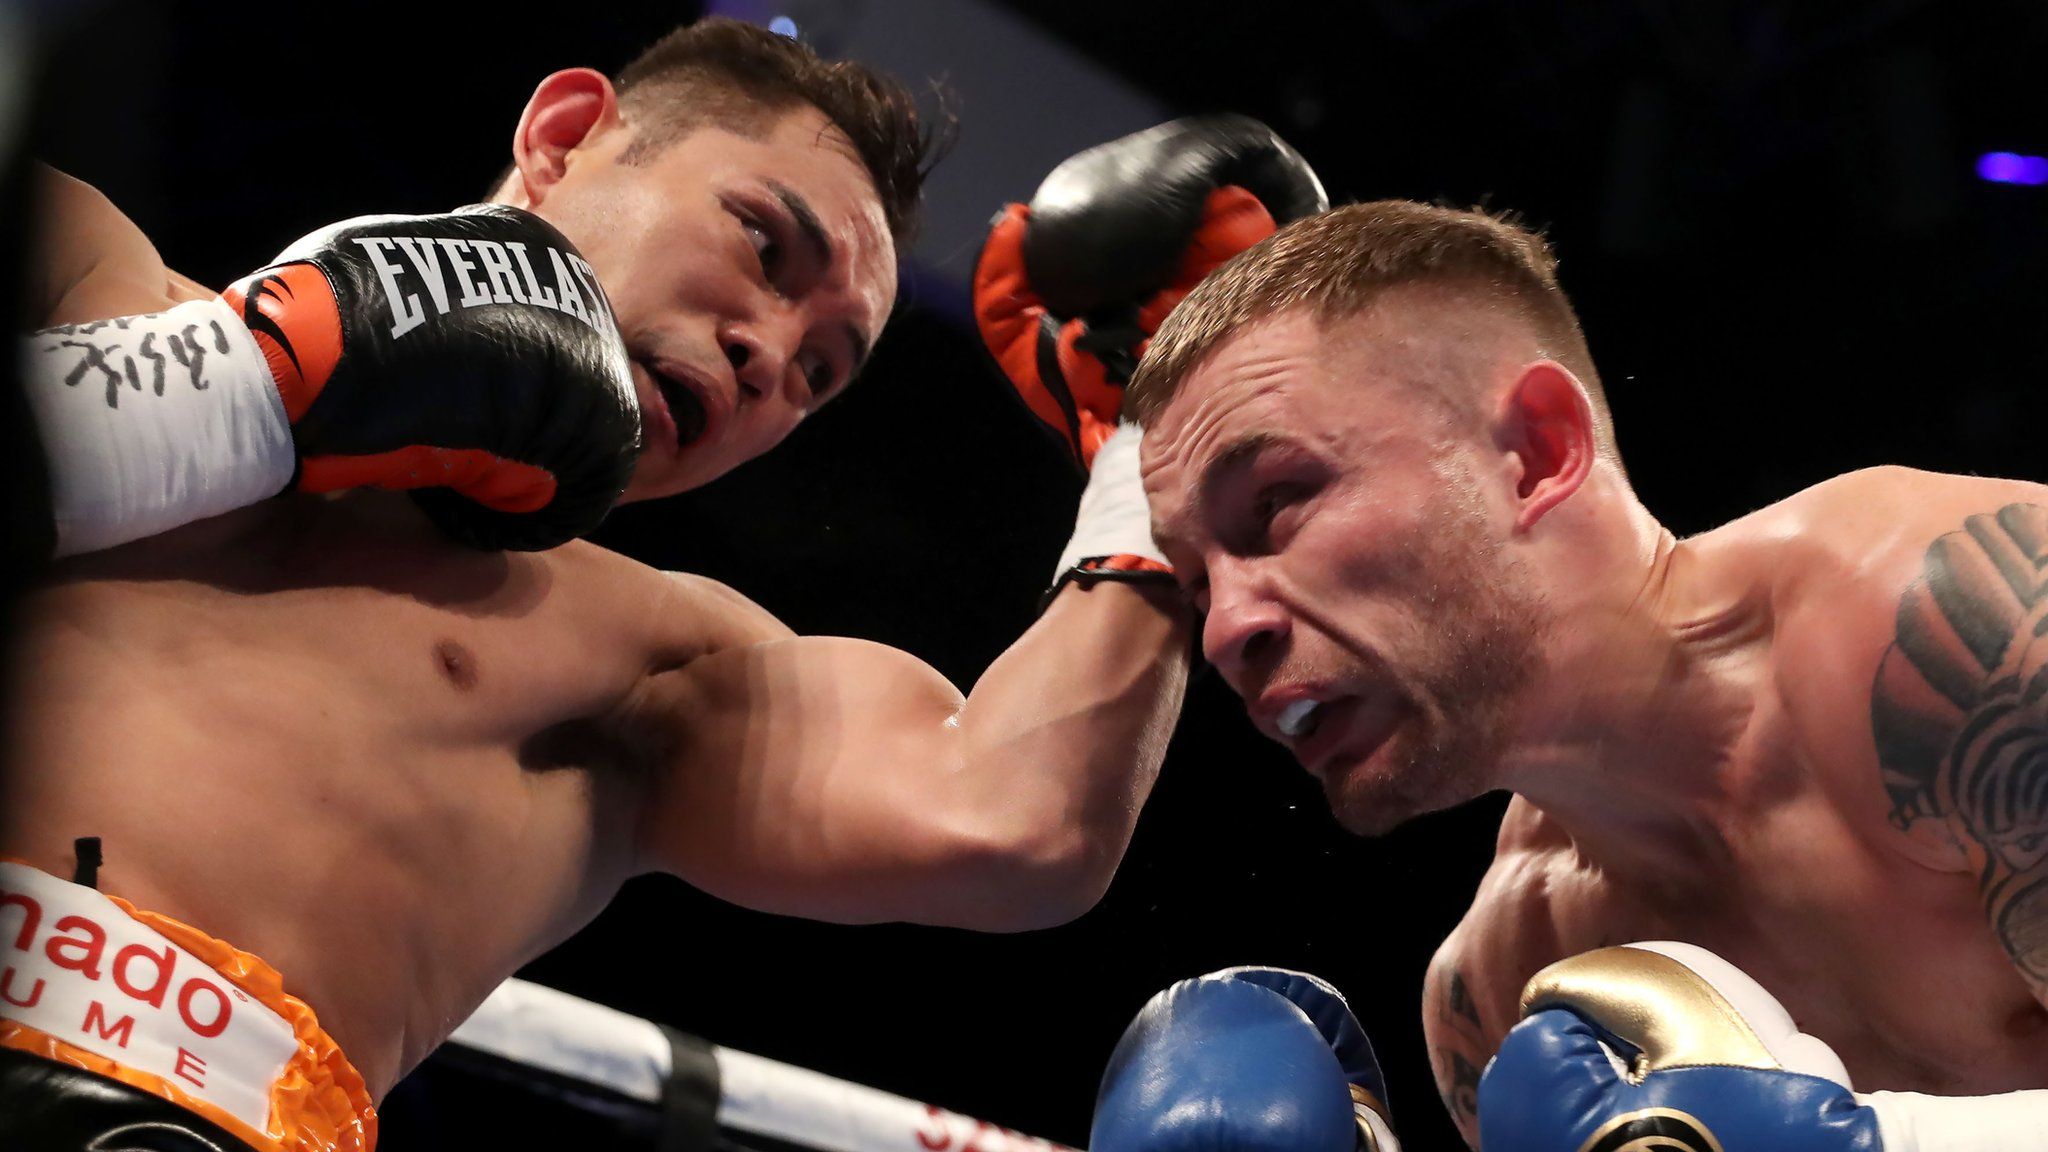 Carl Frampton evades a punch from Nonito Donaire in Belfast